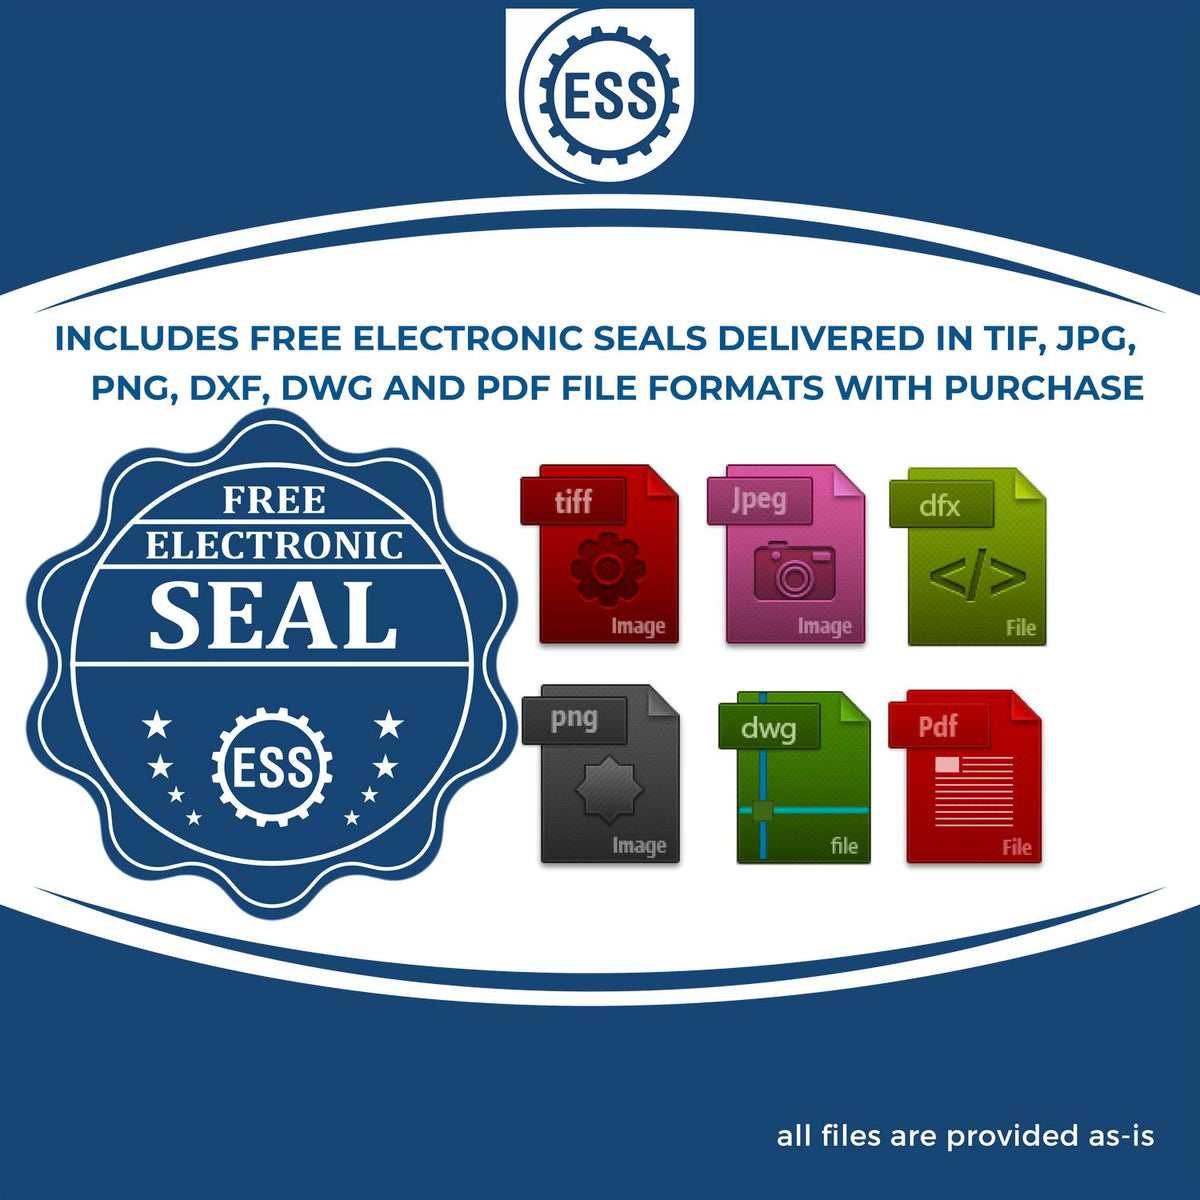 An infographic for the free electronic seal for the Heavy Duty Cast Iron Colorado Architect Embosser illustrating the different file type icons such as DXF, DWG, TIF, JPG and PNG.